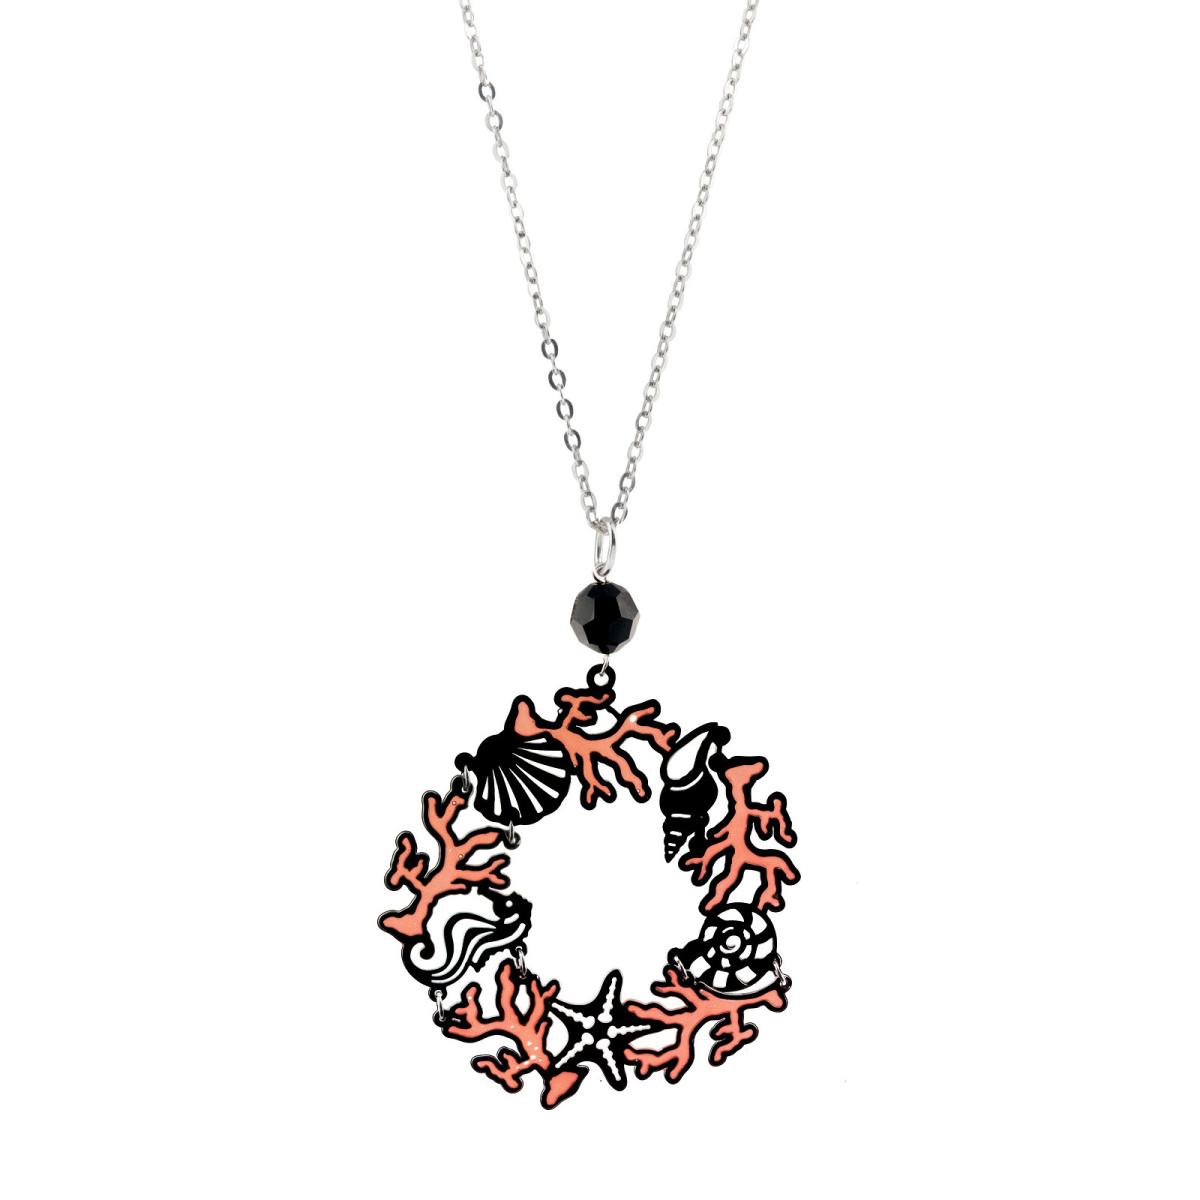 Black rhodium-silver necklace with cathedral enamels - ZCL692-ML